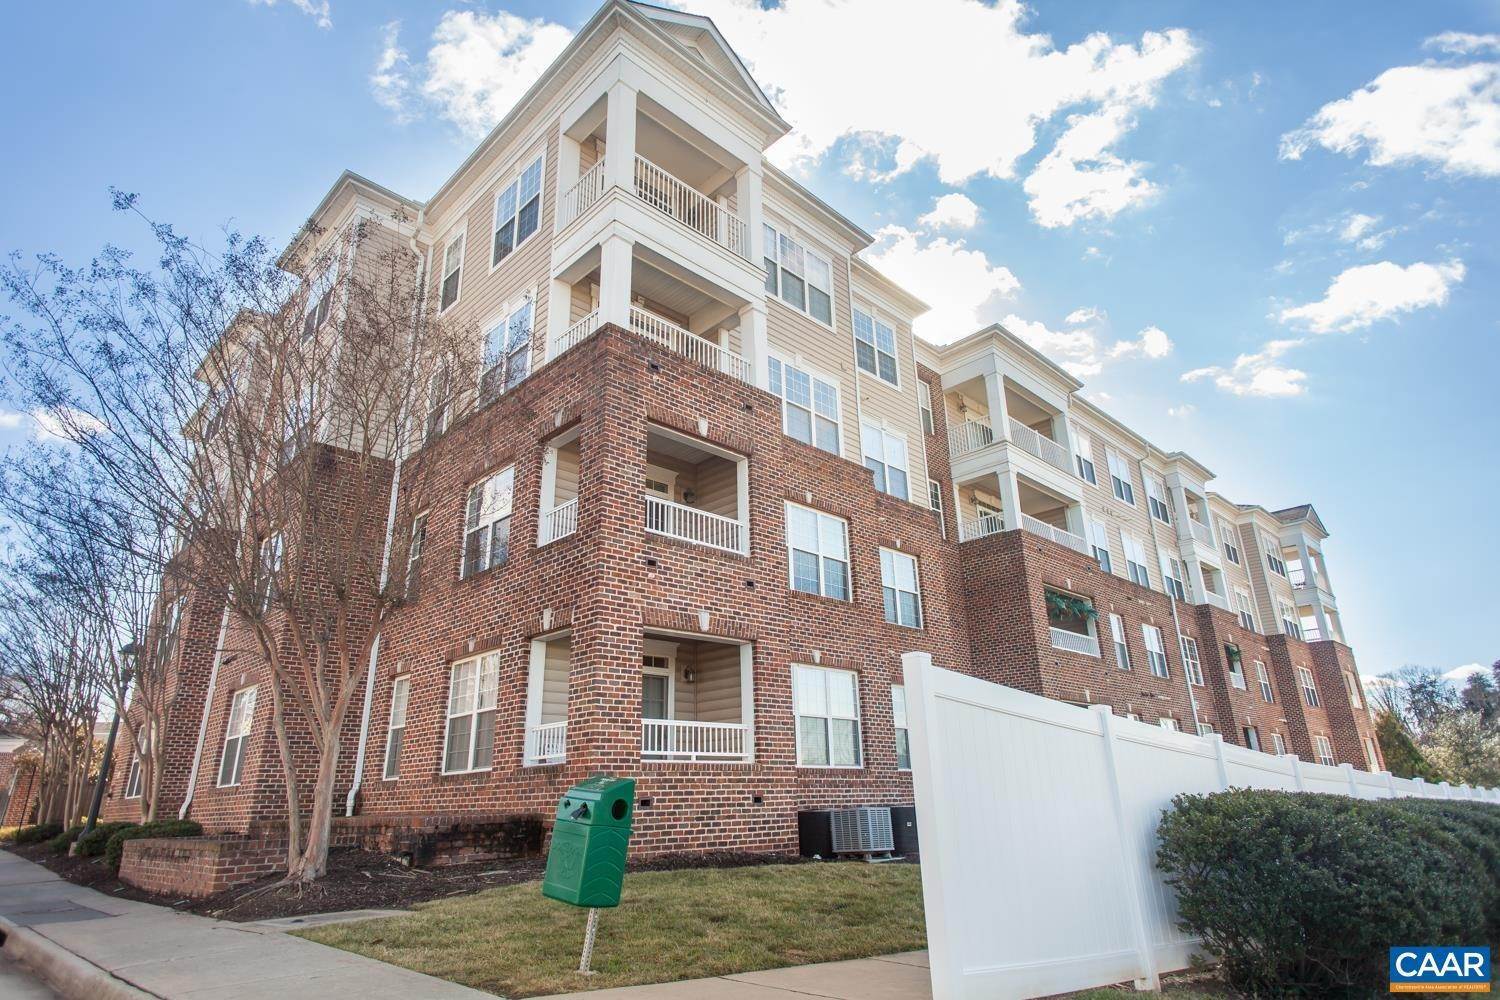 1. Condominiums for Sale at 1051 GLENWOOD STATION LN #304 Charlottesville, Virginia 22901 United States